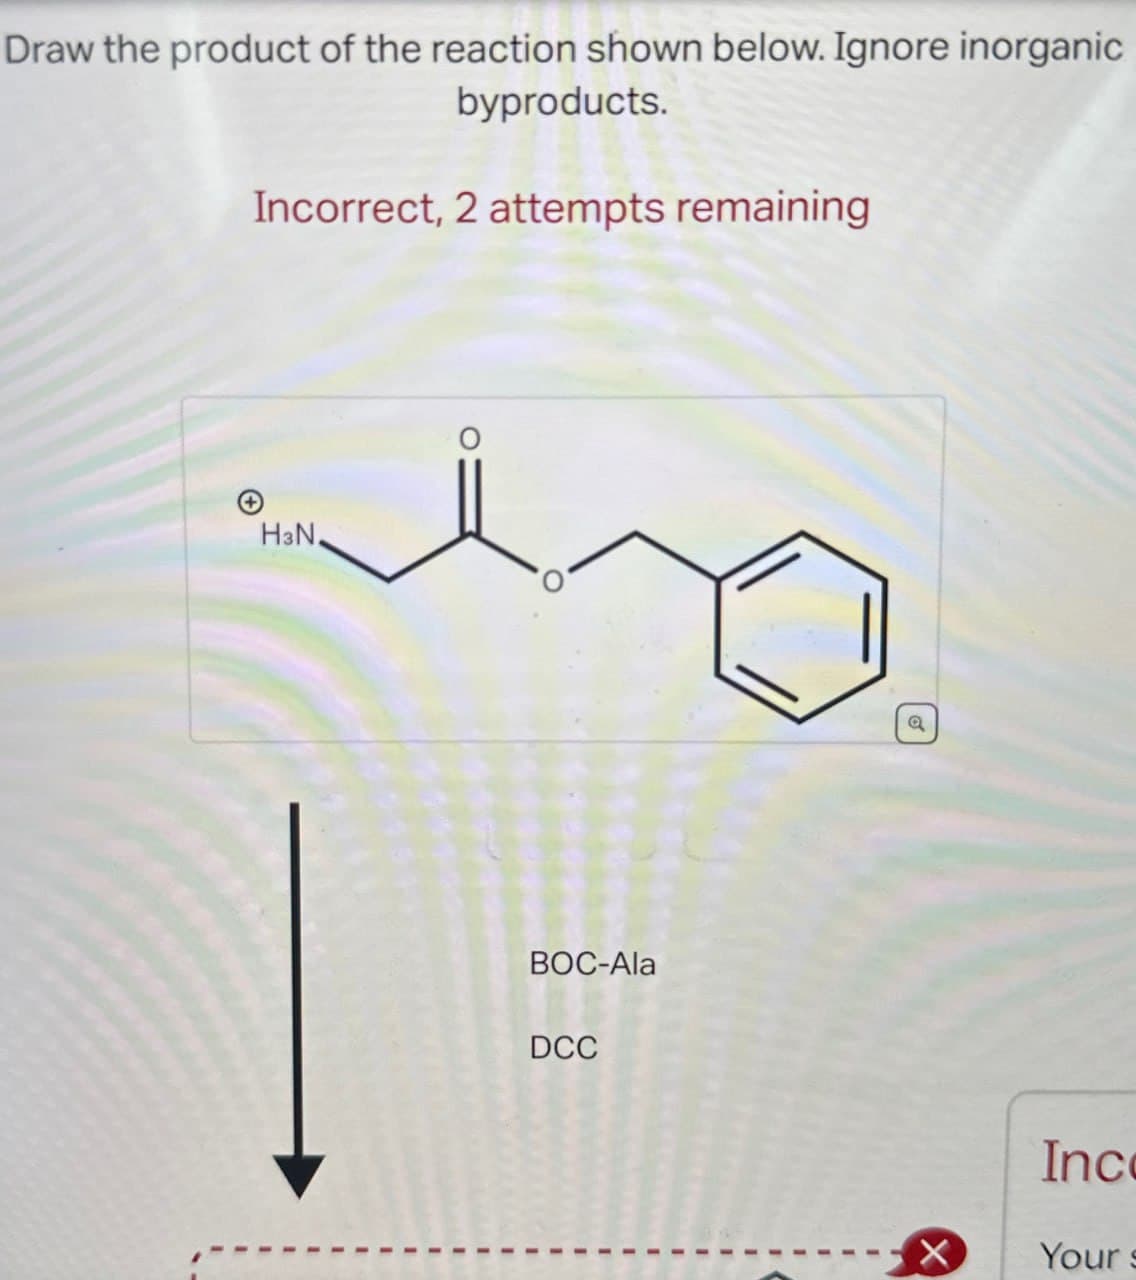 Draw the product of the reaction shown below. Ignore inorganic
byproducts.
Incorrect, 2 attempts remaining
HзN.
BOC-Ala
DCC
a
Inc
X
Your